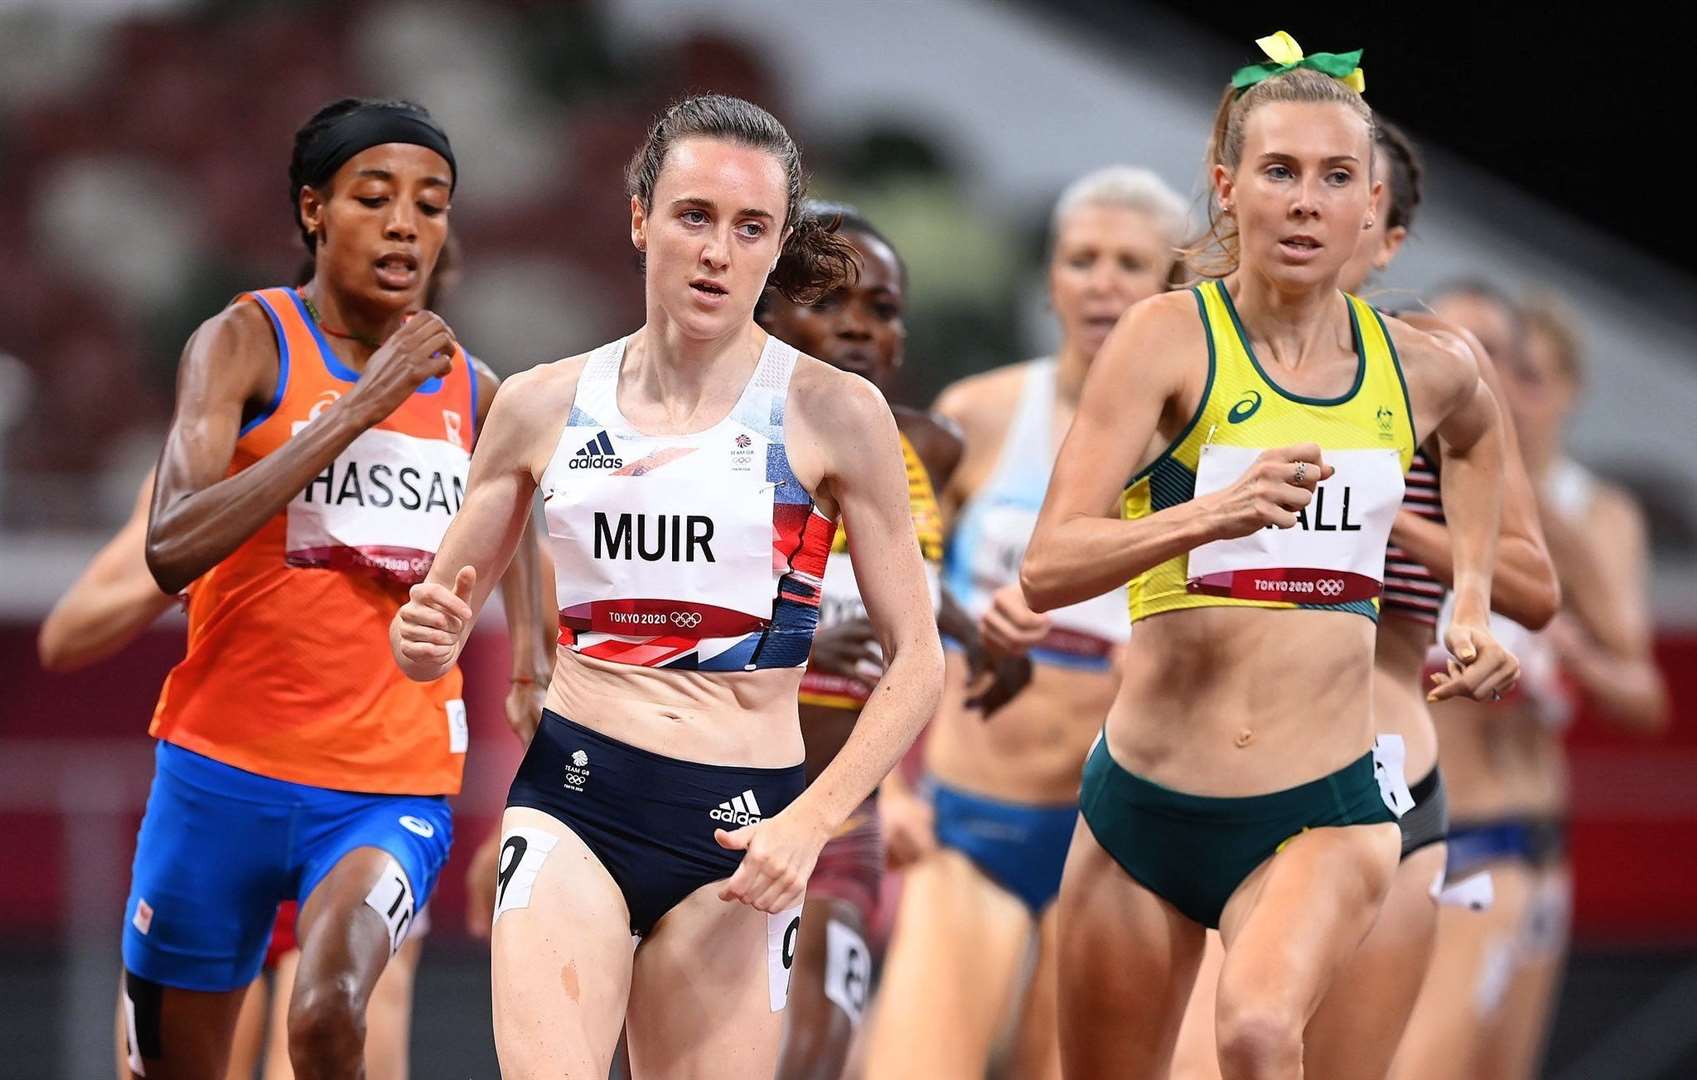 Laura Muir in action at the Olympics. Twitter @lauramuiruns.